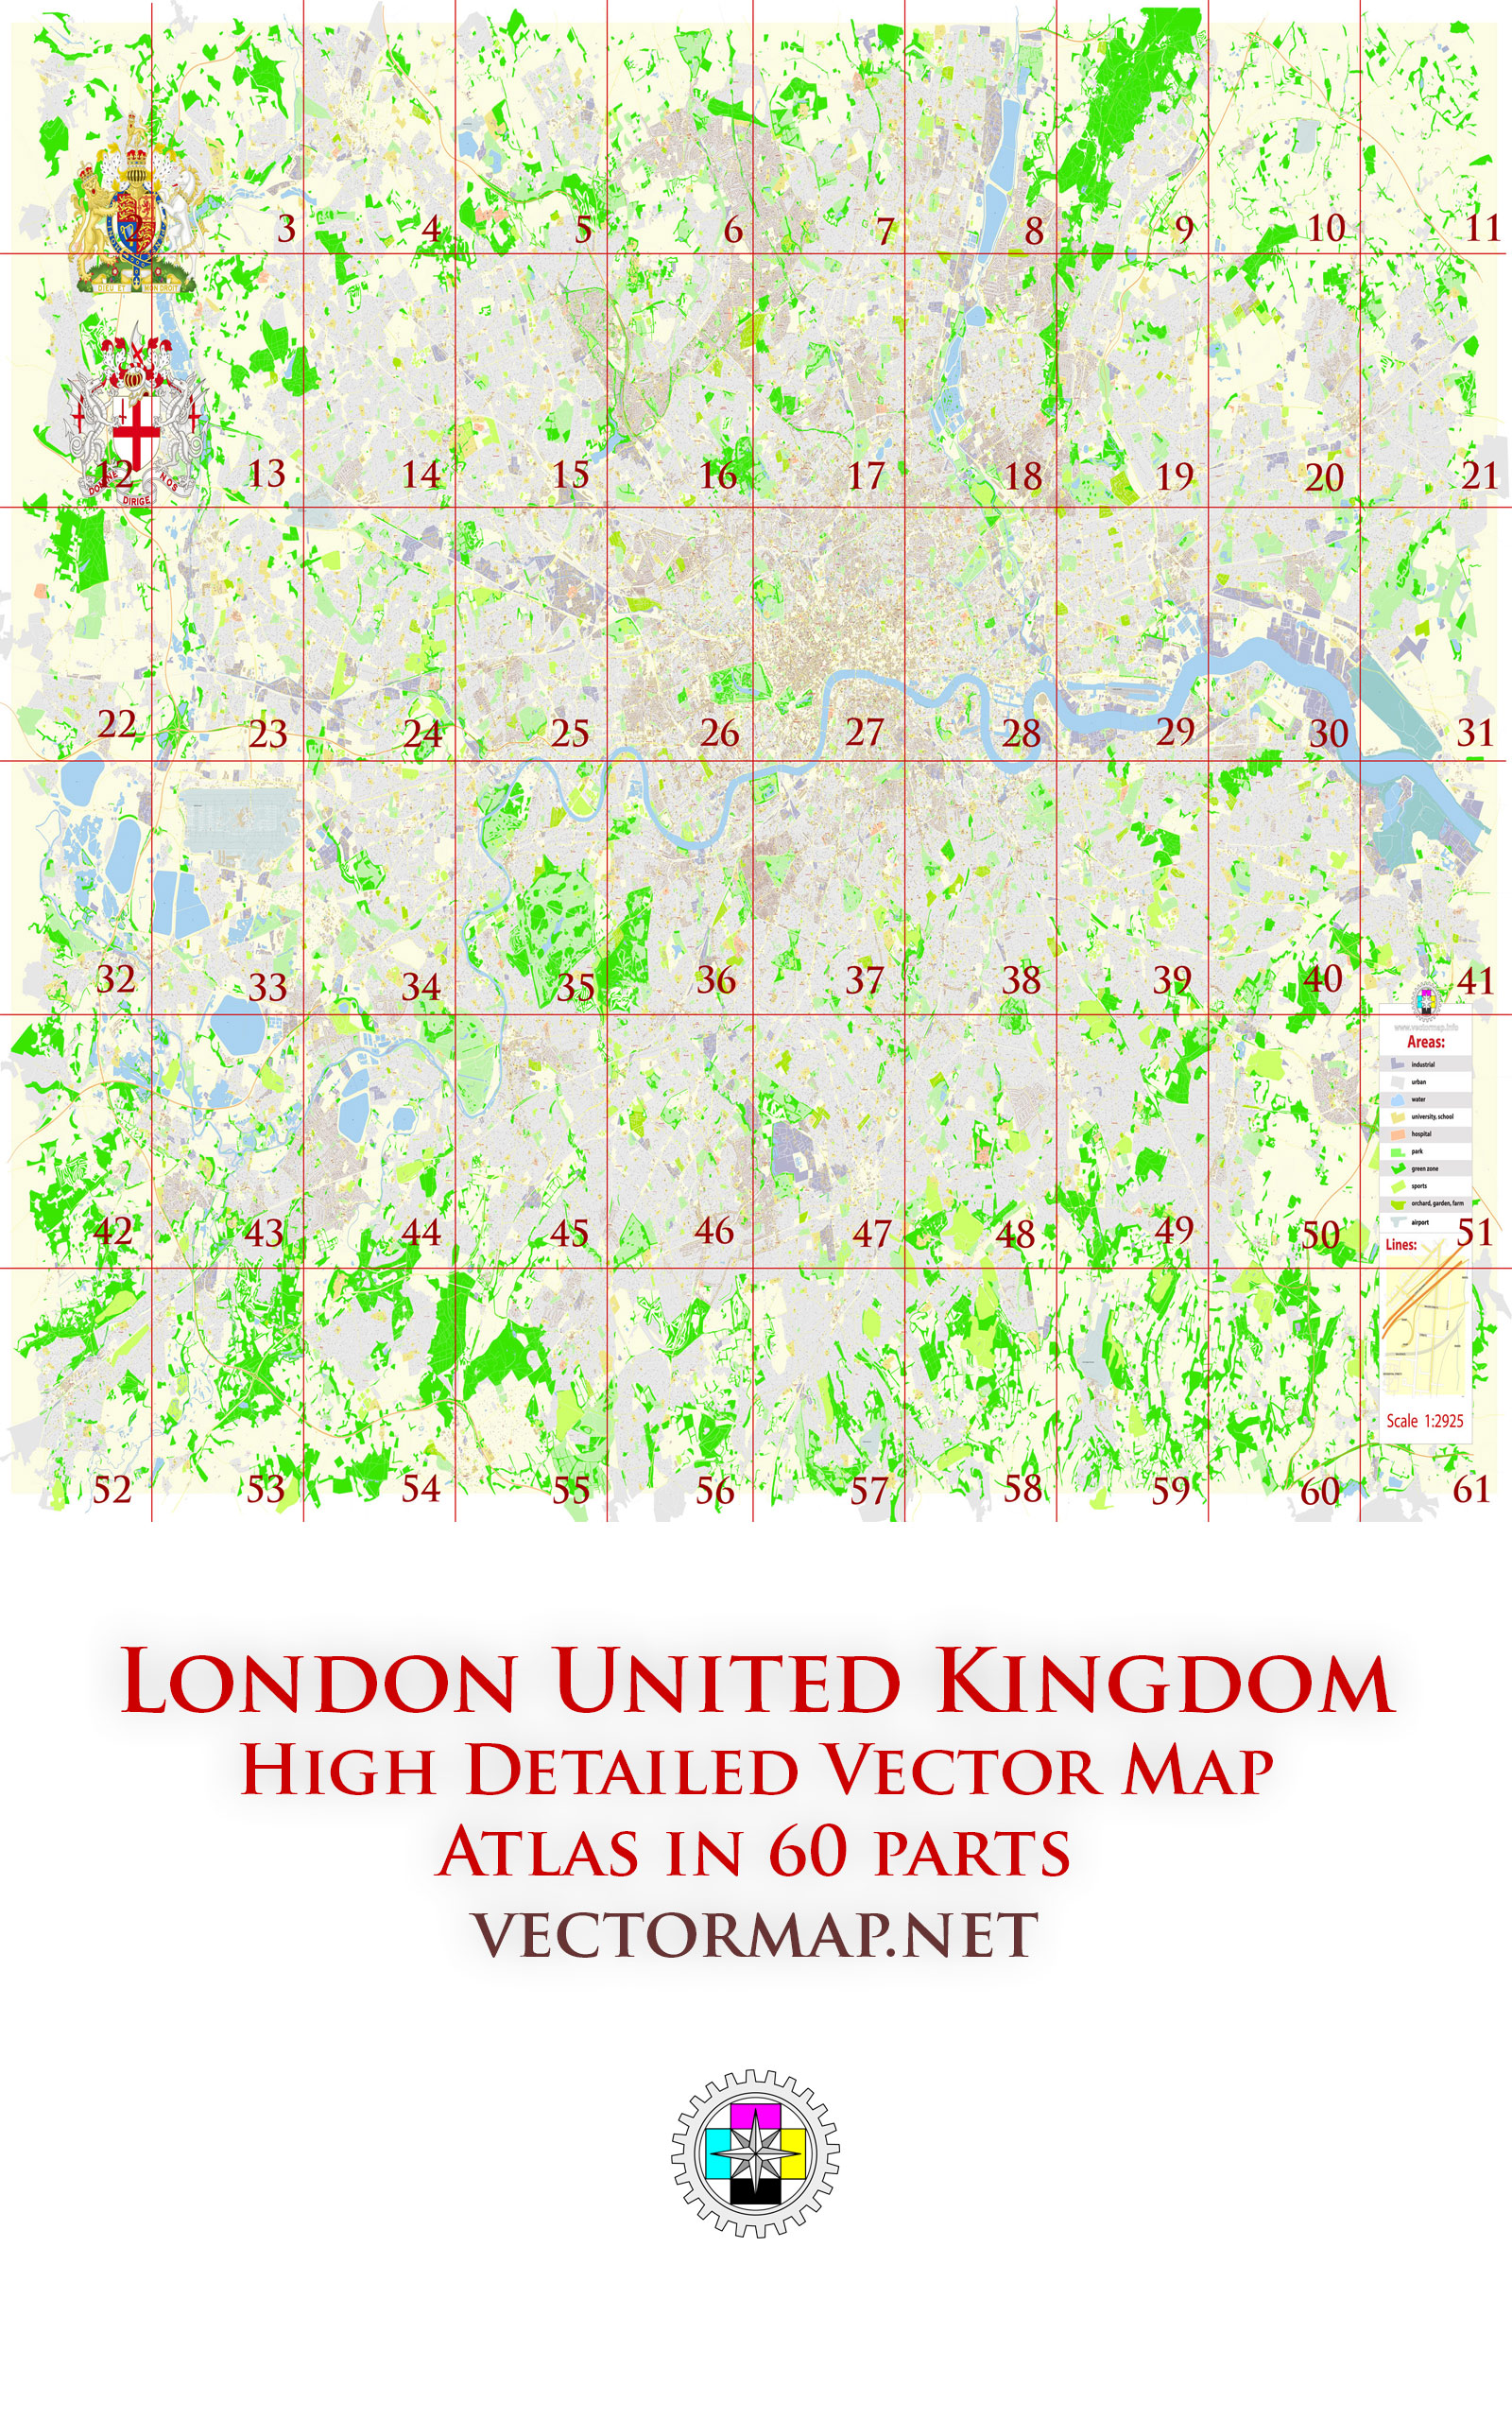 London Greater UK Tourist Map multi-page atlas, contains 60 pages vector PDF